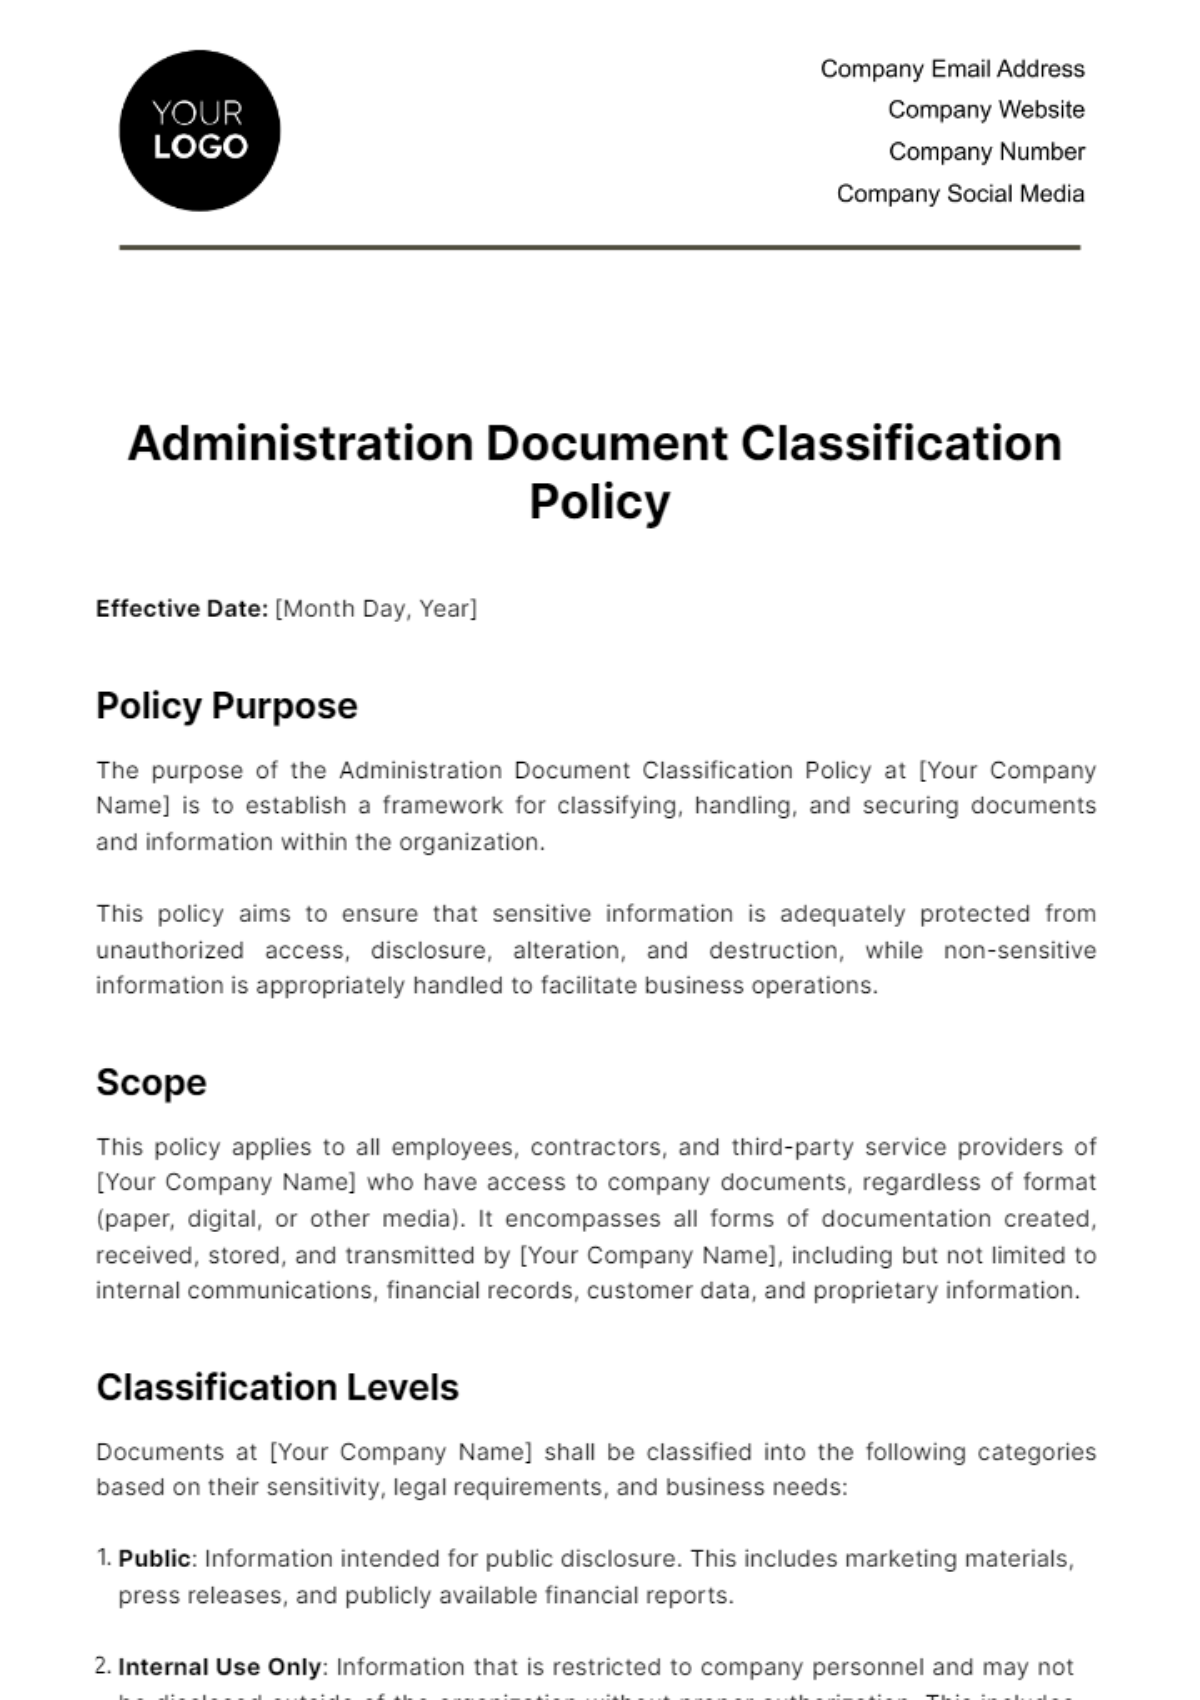 Administration Document Classification Policy Template